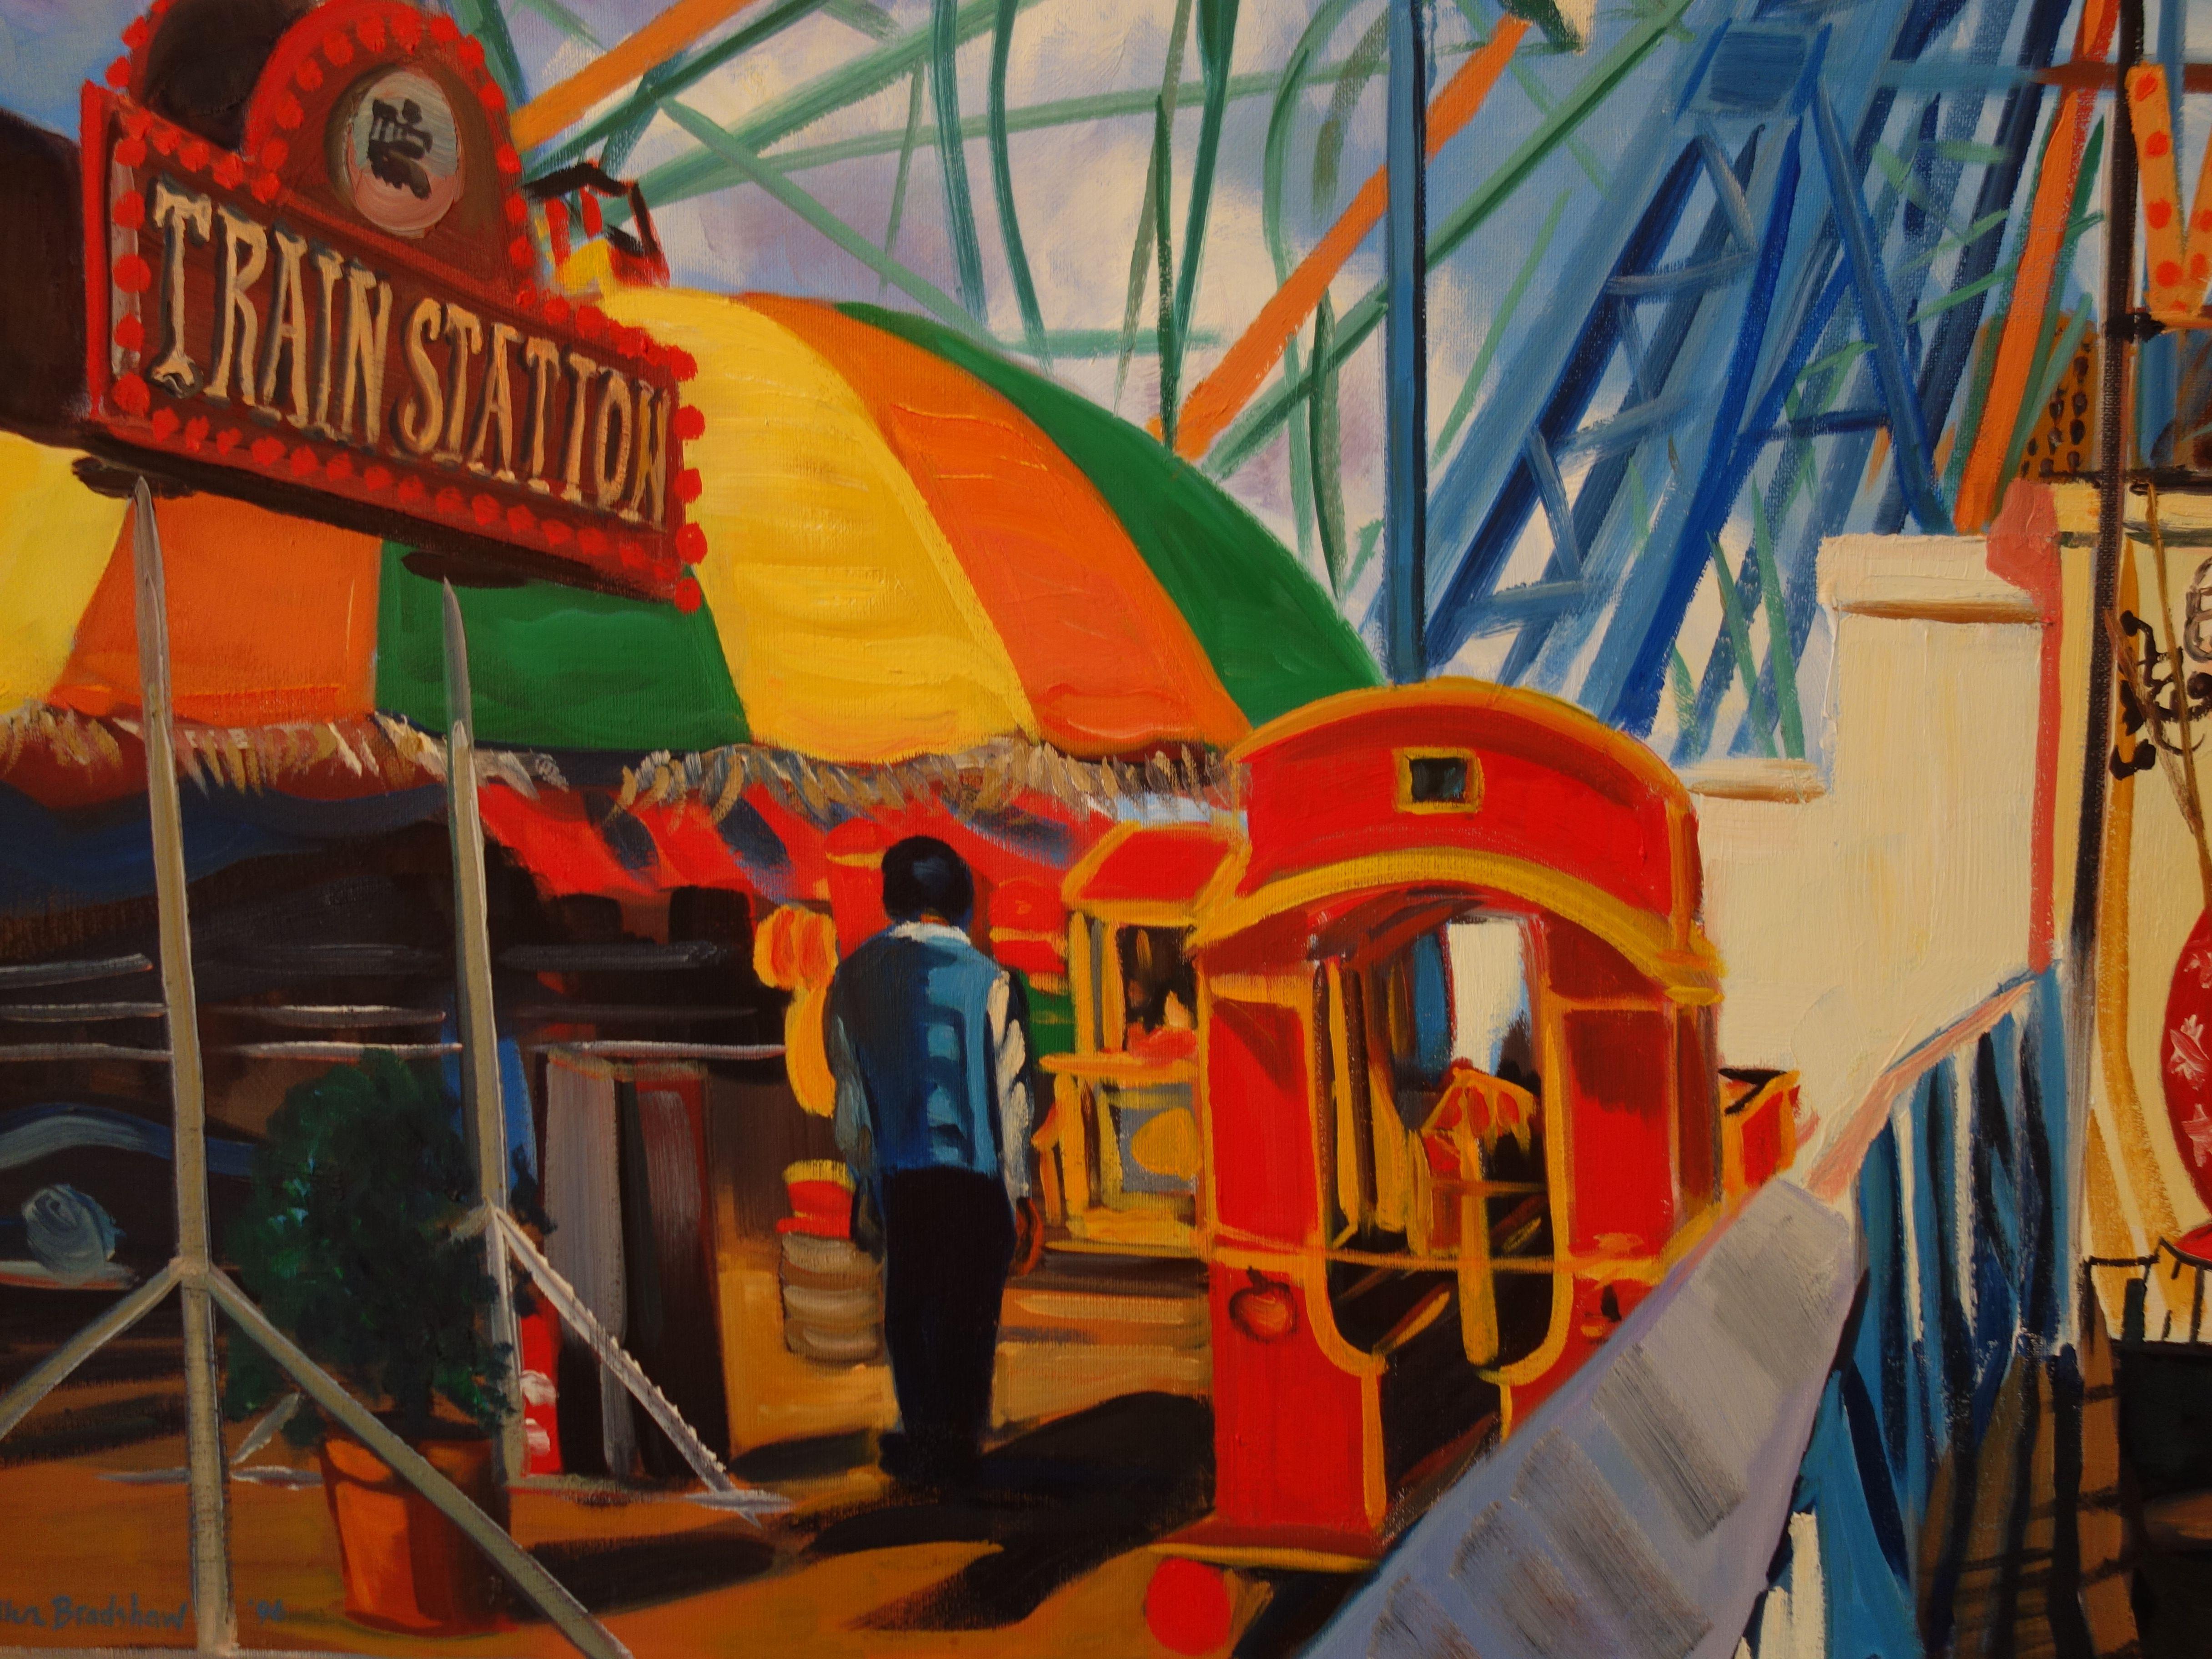 The iconic Wonder Wheel in Coney Island is a favorite of mine!! The thrill of this old-fashioned ride amidst the vibrant colors, colorful characters and summertime fun gave me so much joy to paint!!! As loved today as it was in yesteryears!!   ::